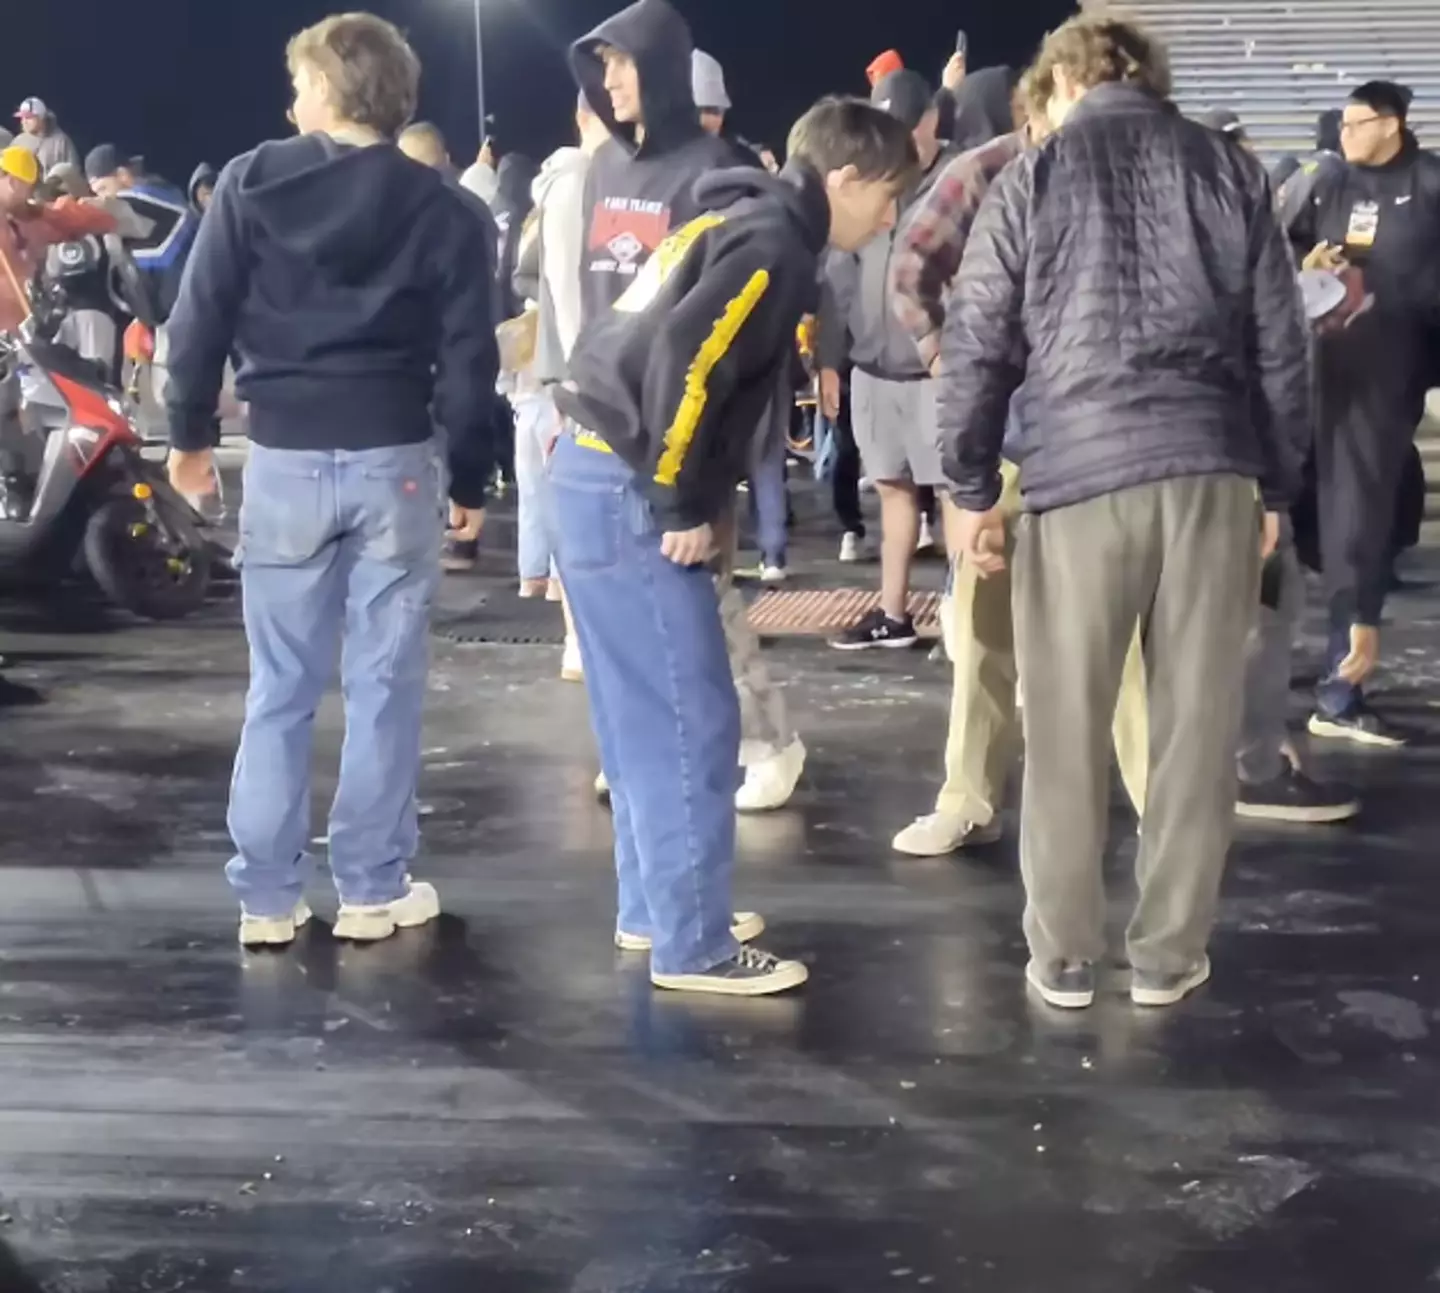 Fans were shocked by the condition of the track.